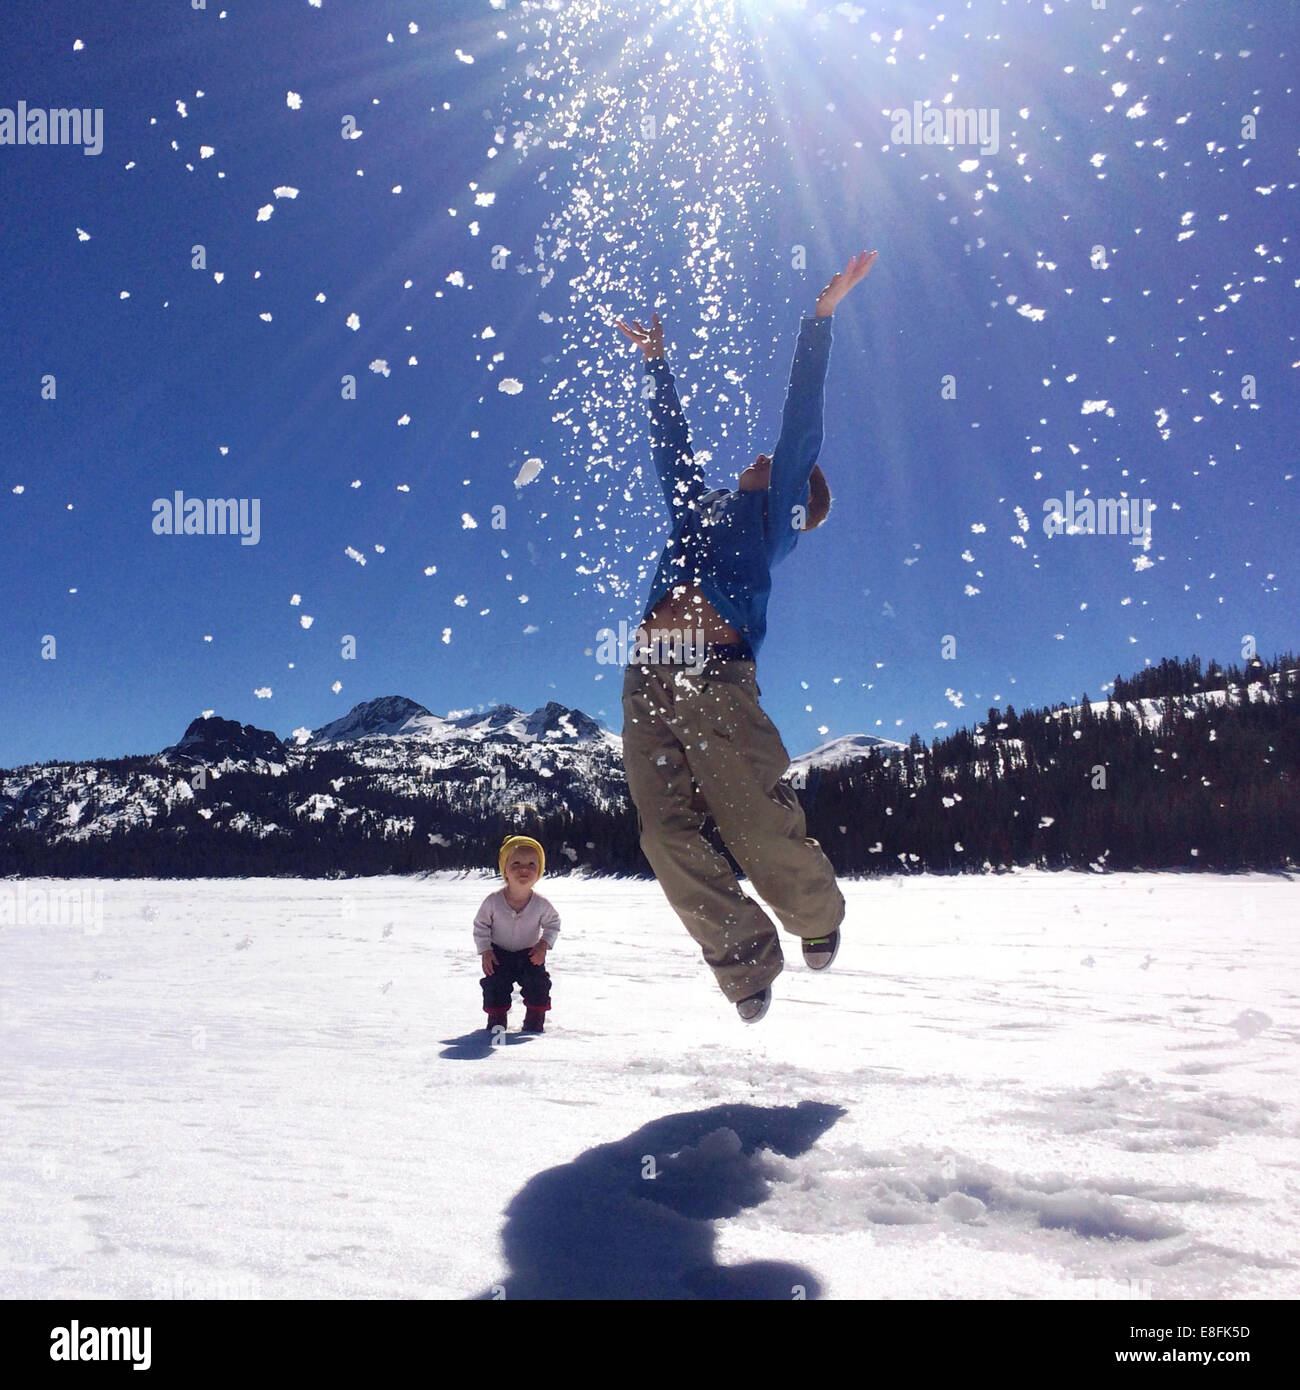 Two boys playing in the snow, Lake Tahoe, California, USA Stock Photo